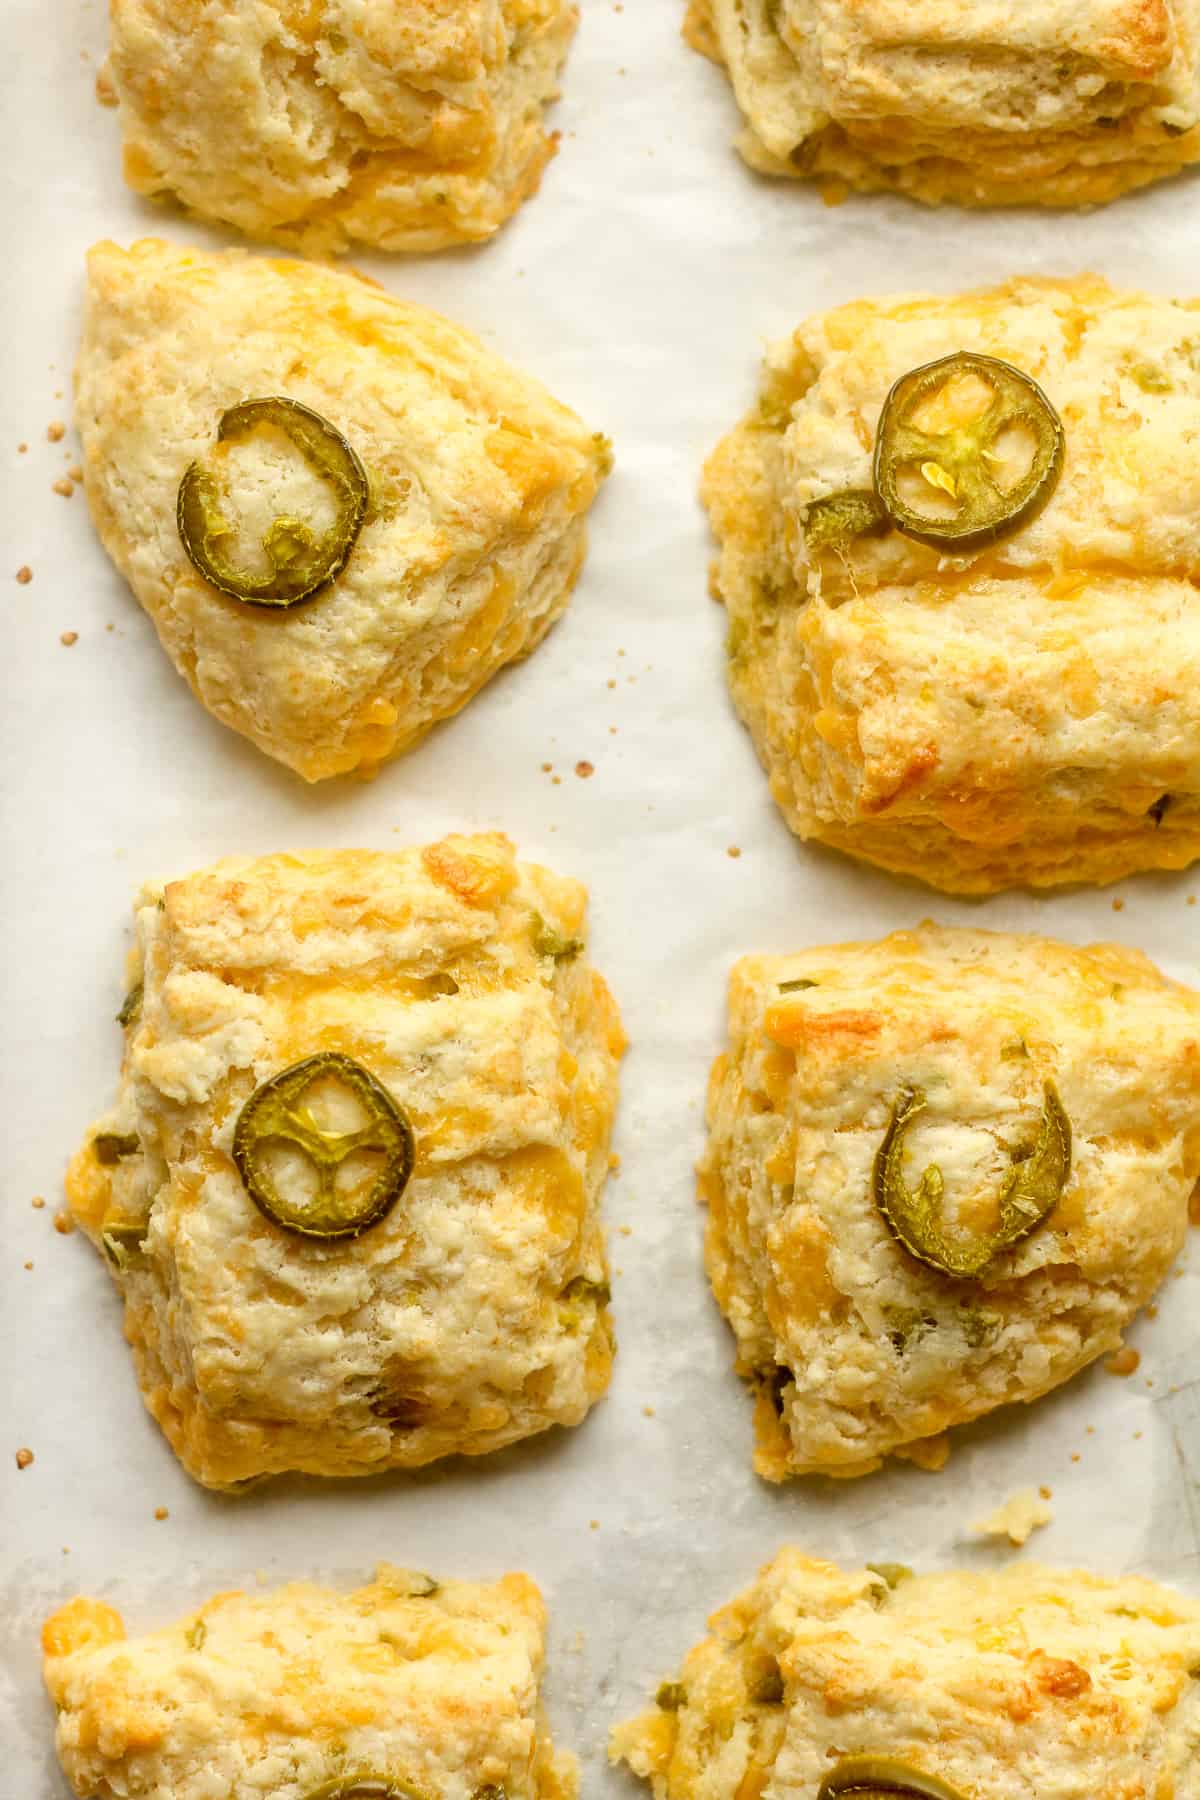 Closeup on some cheddar biscuits with jalapeños.